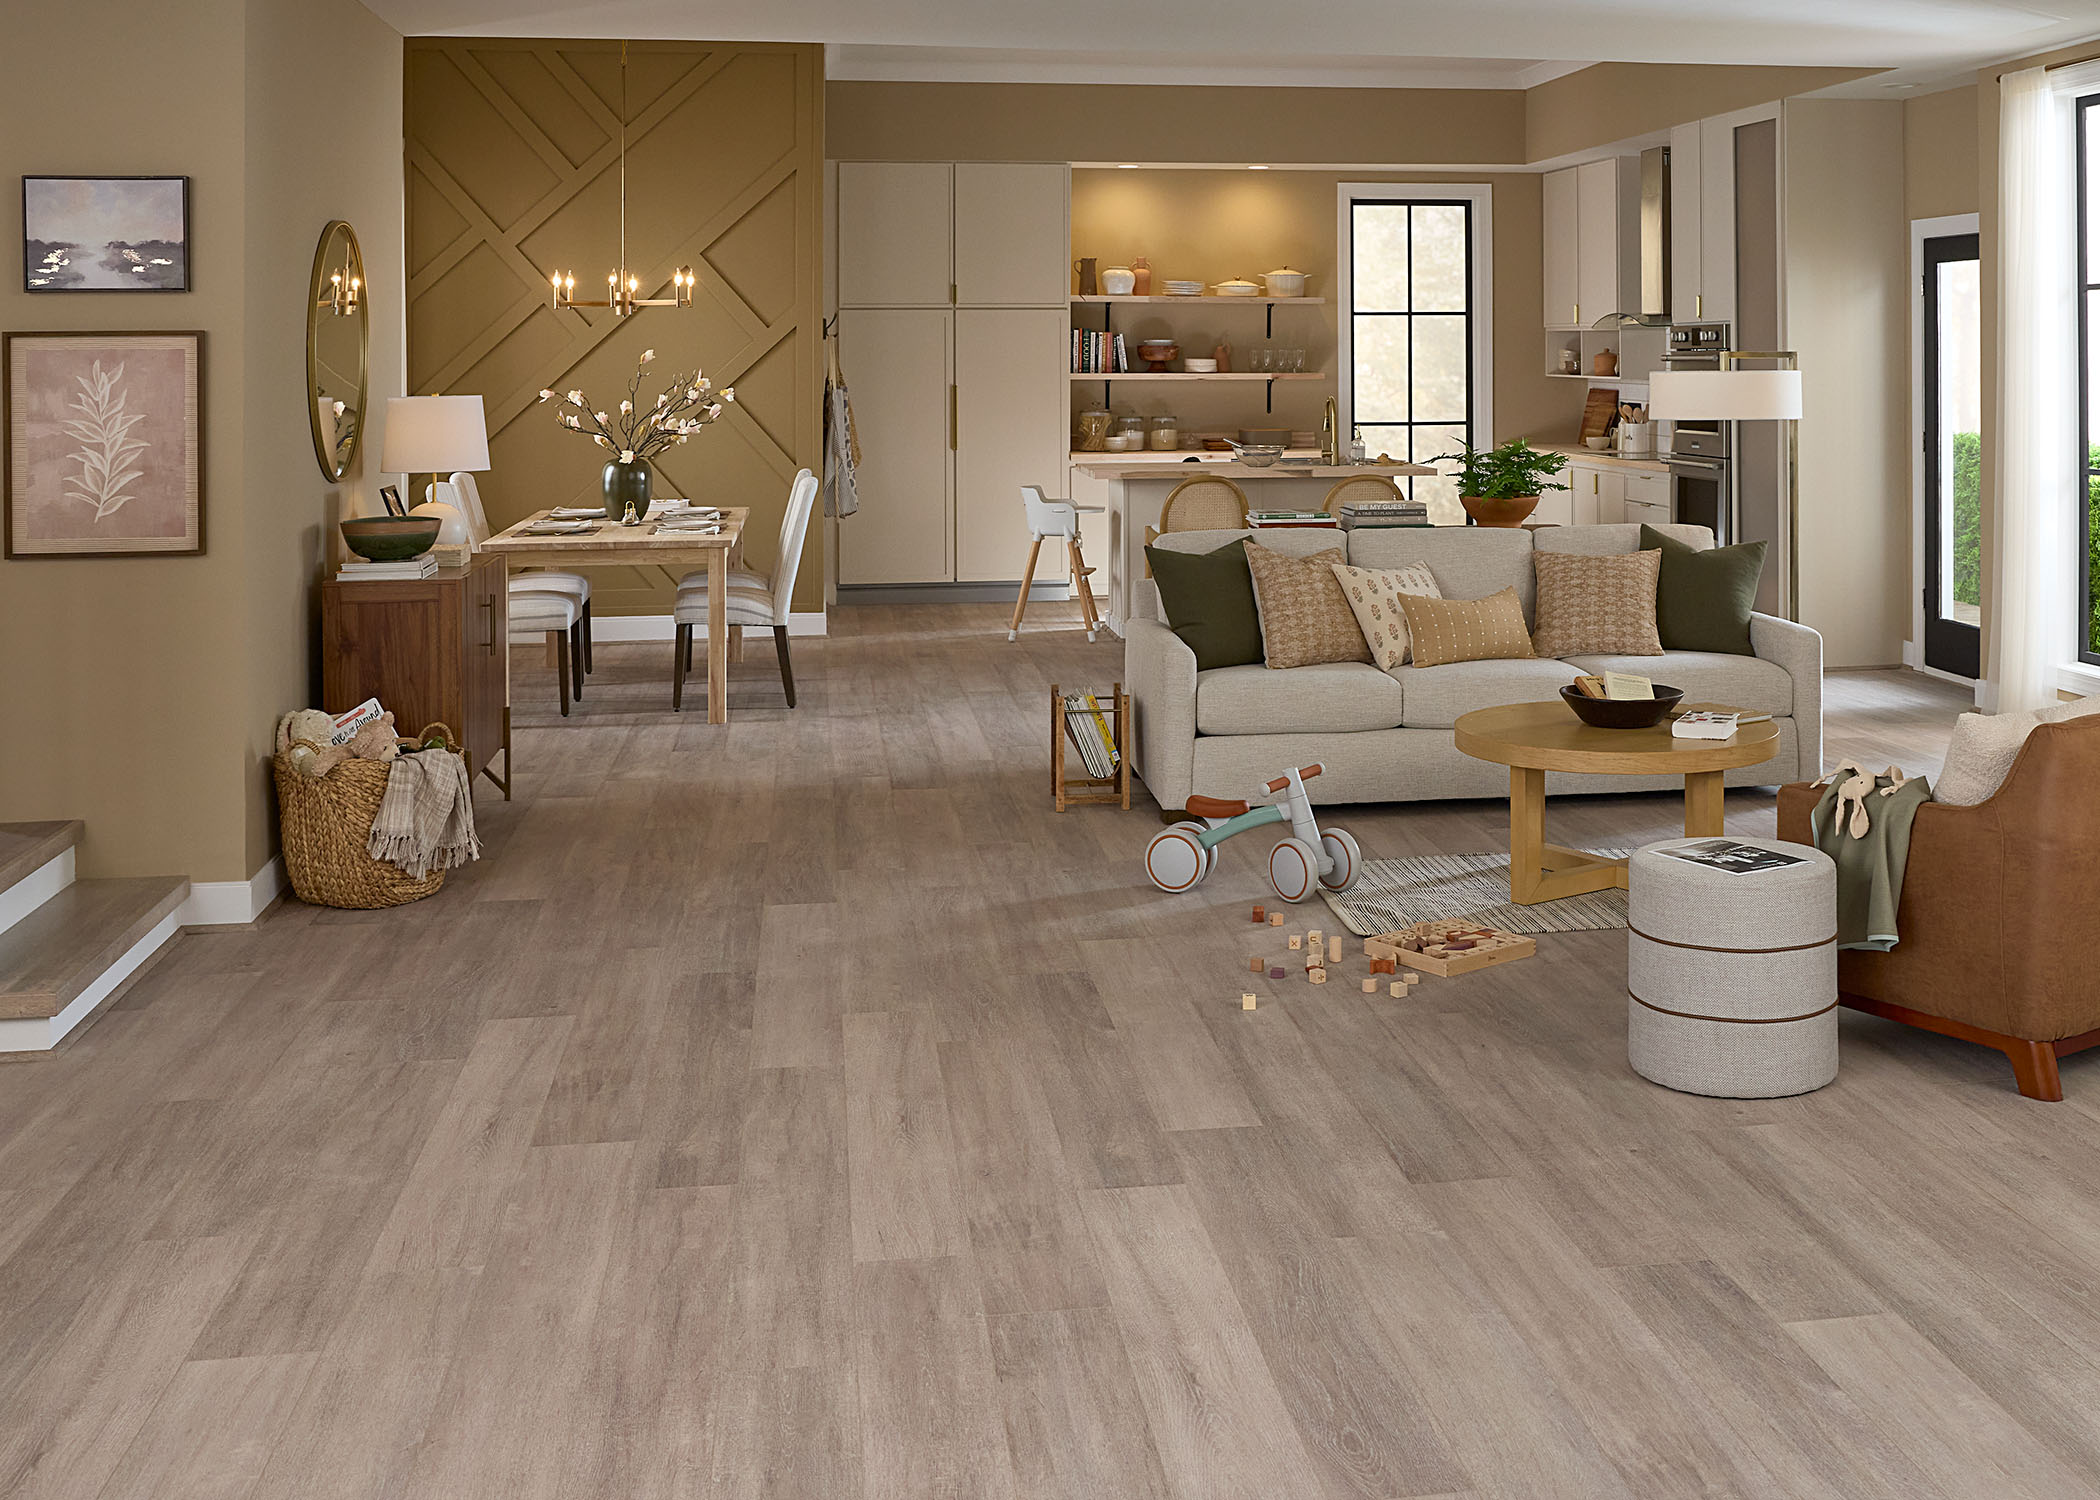 light brown waterproof rigid vinyl plank floor in open concept living, dining and kitchen with beige sofa and caramel accent chair plus wood dining table with cream chairs and white kitchen cabinets with butcher block counters